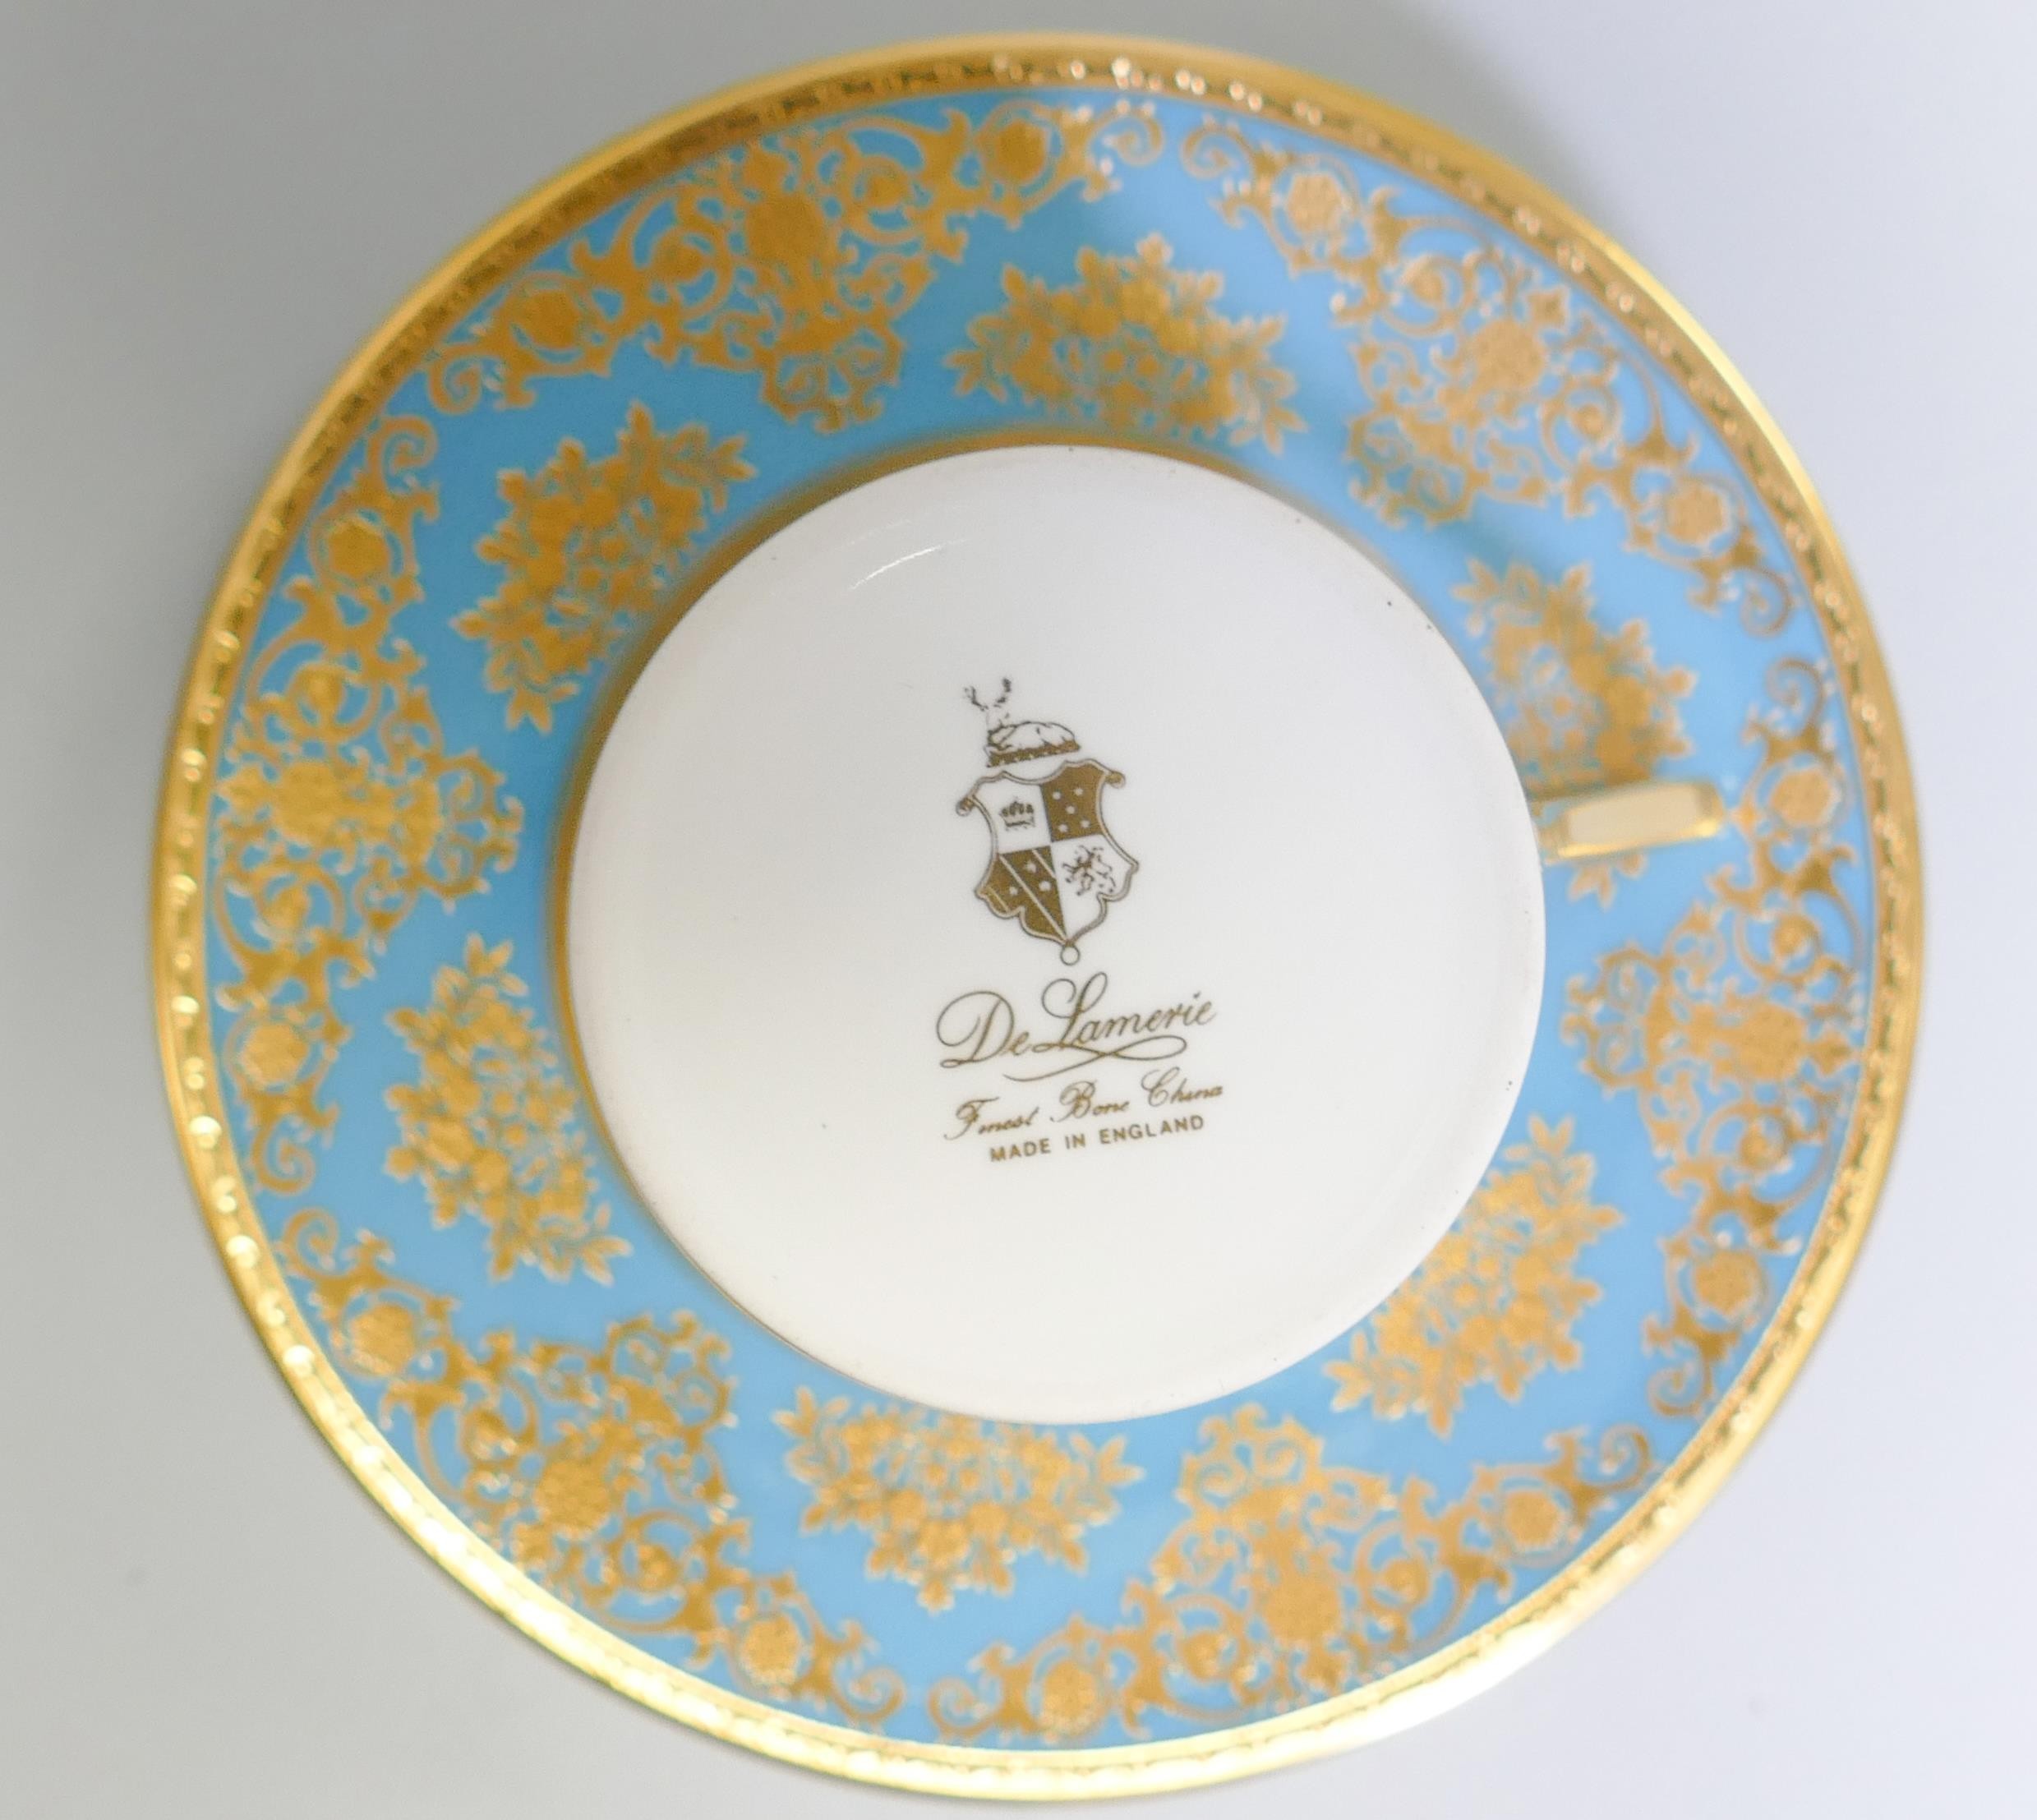 De Lamerie Fine Bone China heavily gilded Turquoise Exotic Garden patterned coffee can & saucer, - Image 2 of 3